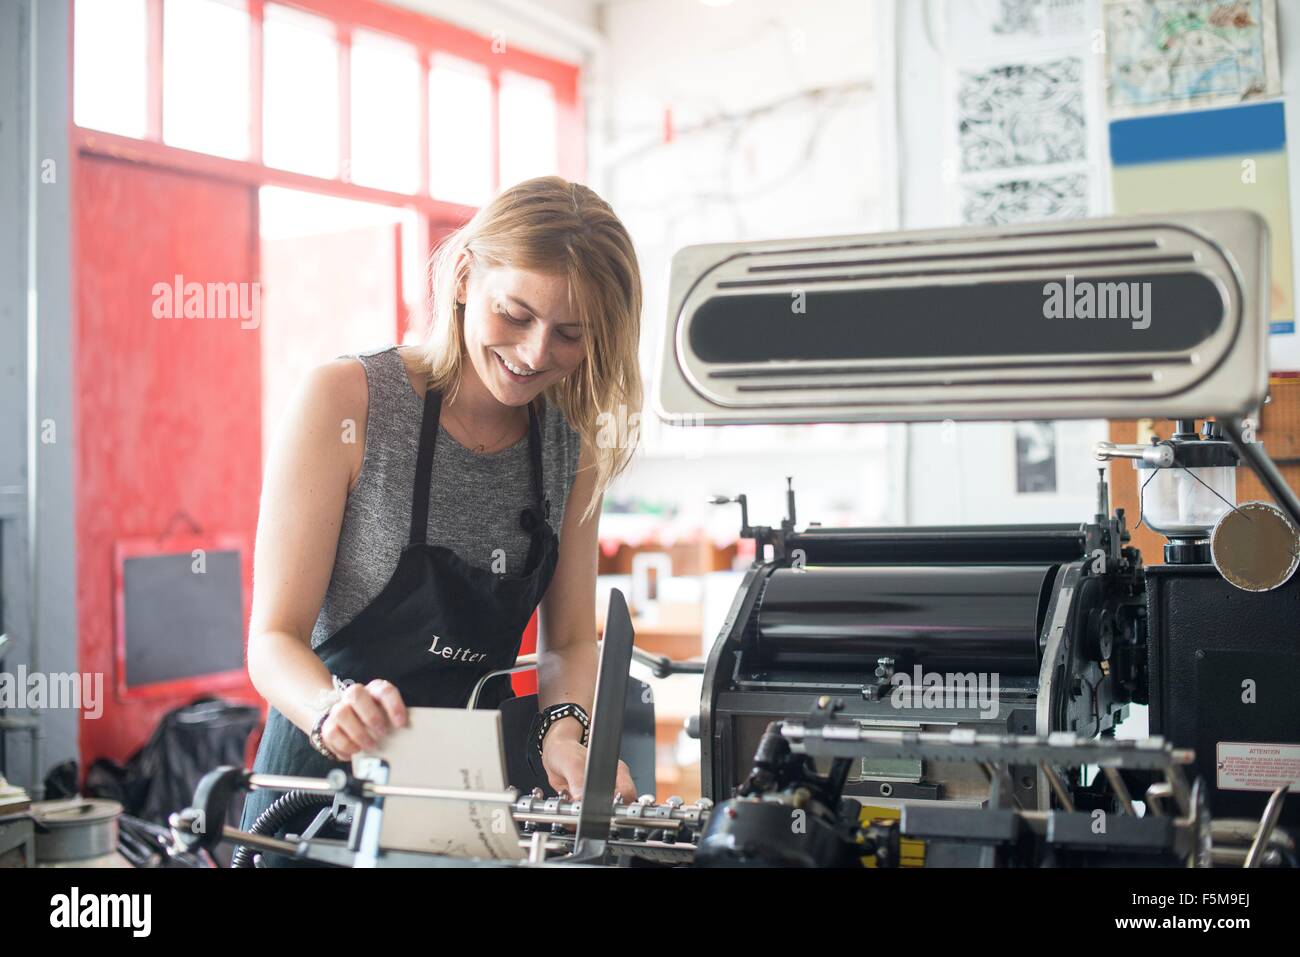 Young woman working with traditional letterpress print machine in workshop Stock Photo